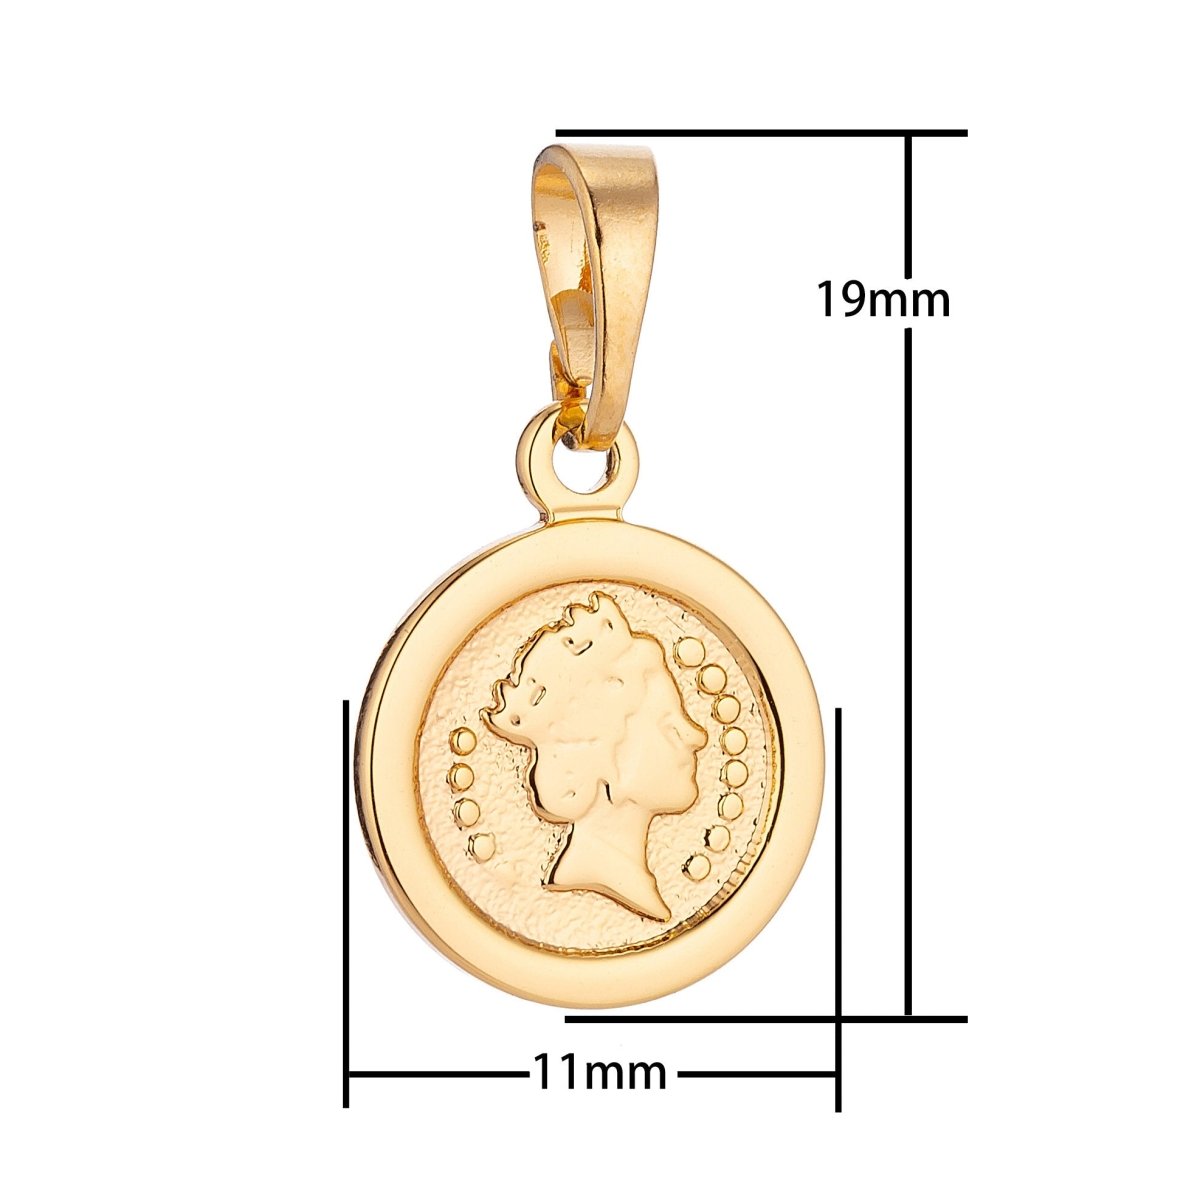 18K Dainty Coin Round Queen Elizabeth ll Gold Fill Delicate Charm Pendant Medallion for Earring Necklace Bracelet Making H-280 - DLUXCA